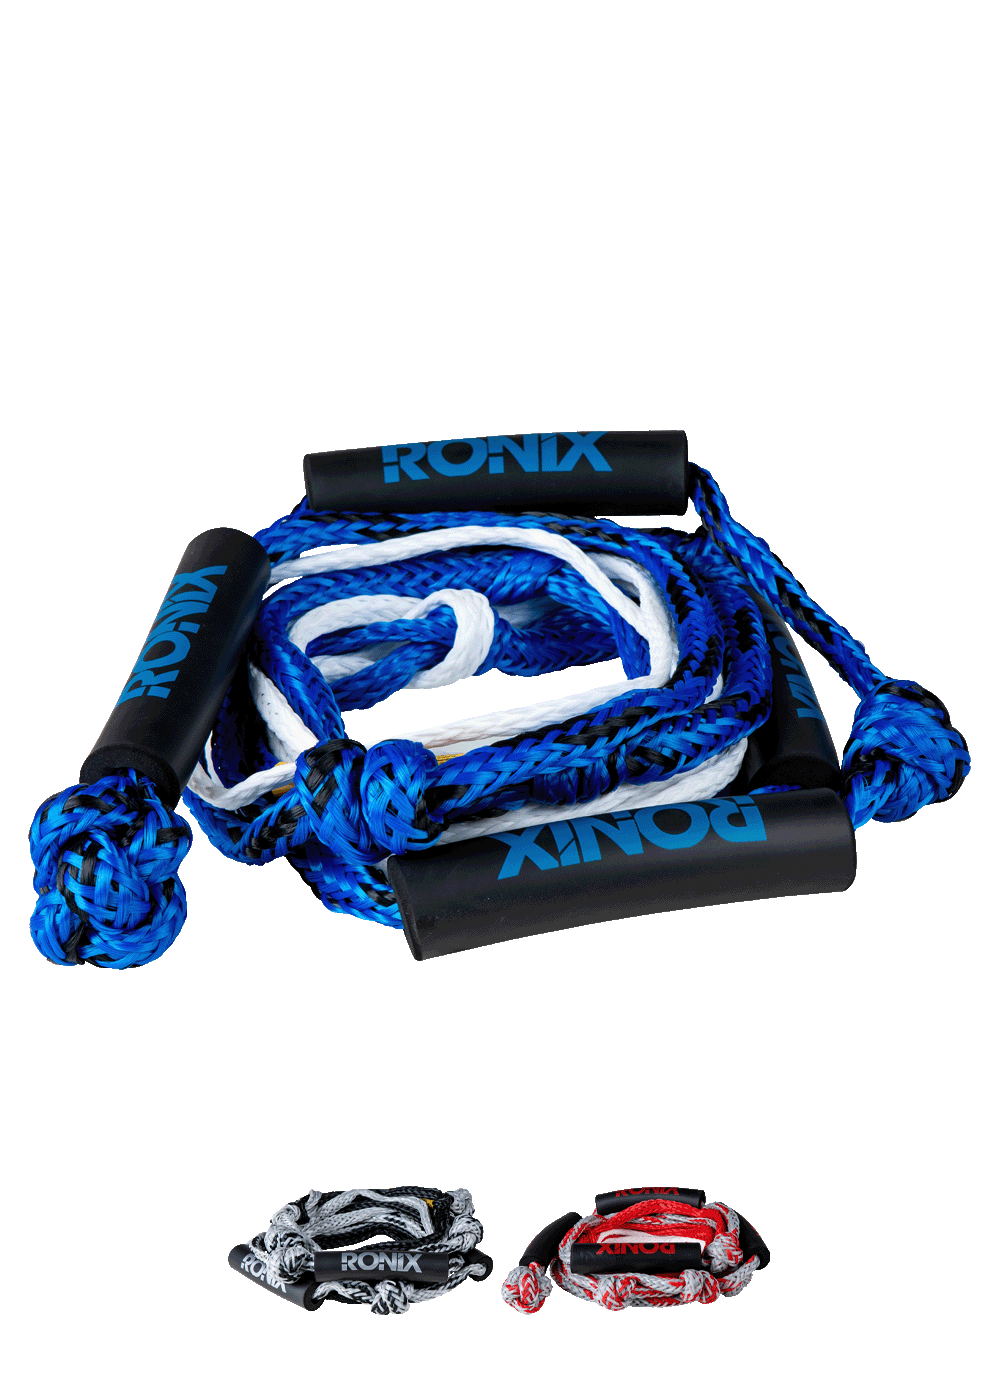 Ronix Bungee Surf Rope W/No Handle 25 Ft. | Ass. Colors